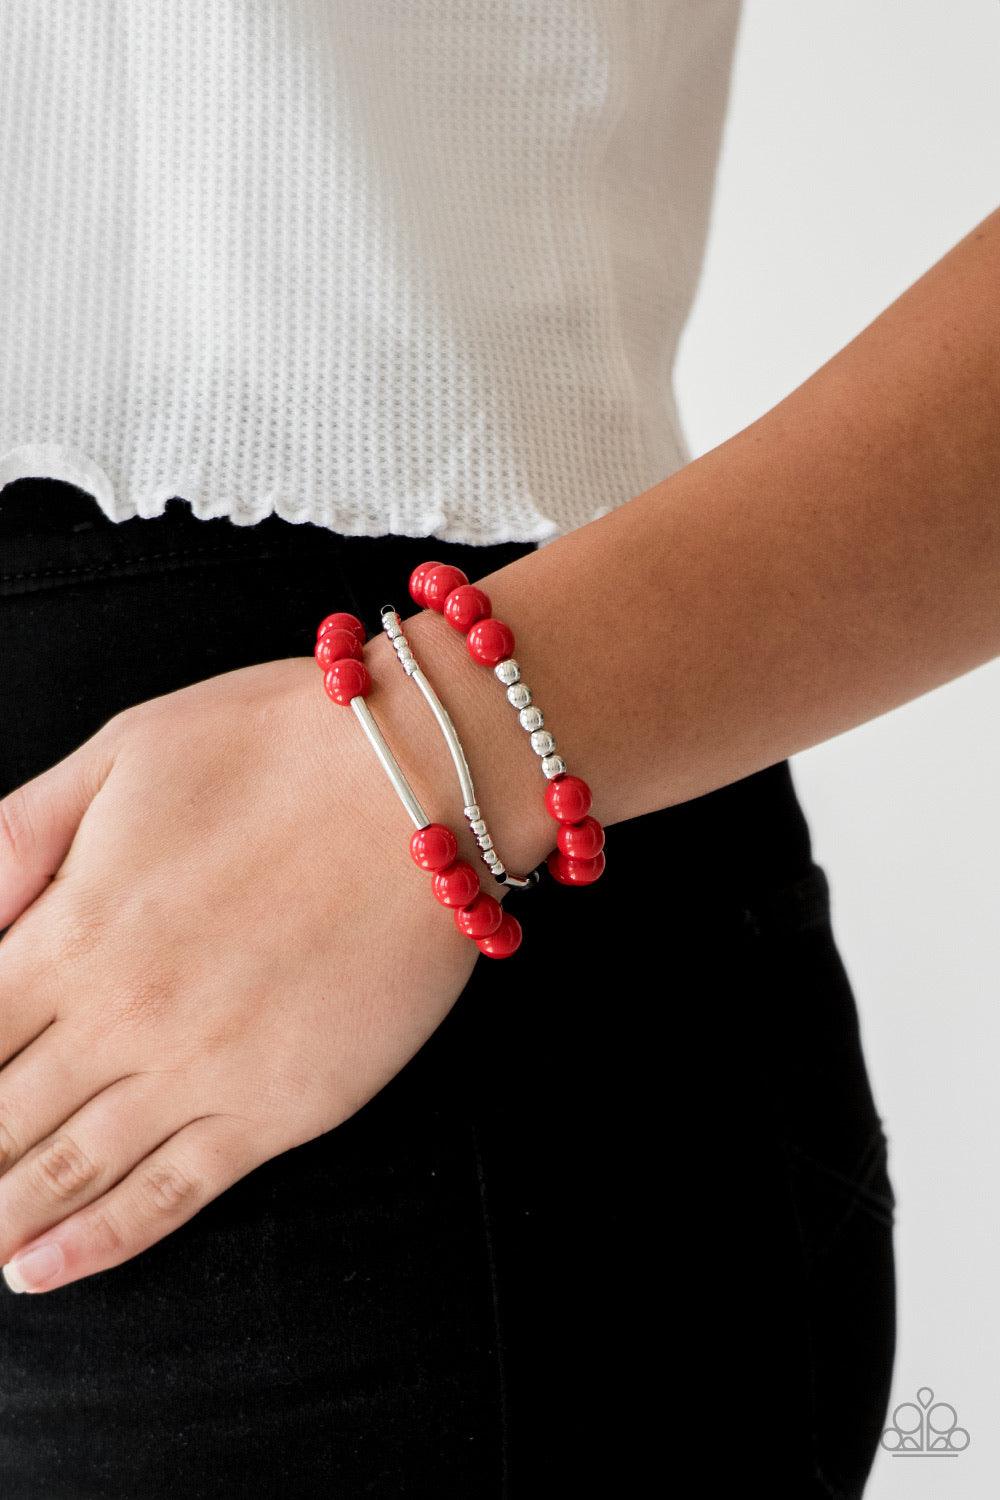 Paparazzi Accessories New Adventures - Red Polished red beads and mismatched silver beads are threaded along stretchy bands, creating colorful layers across the wrist. Jewelry